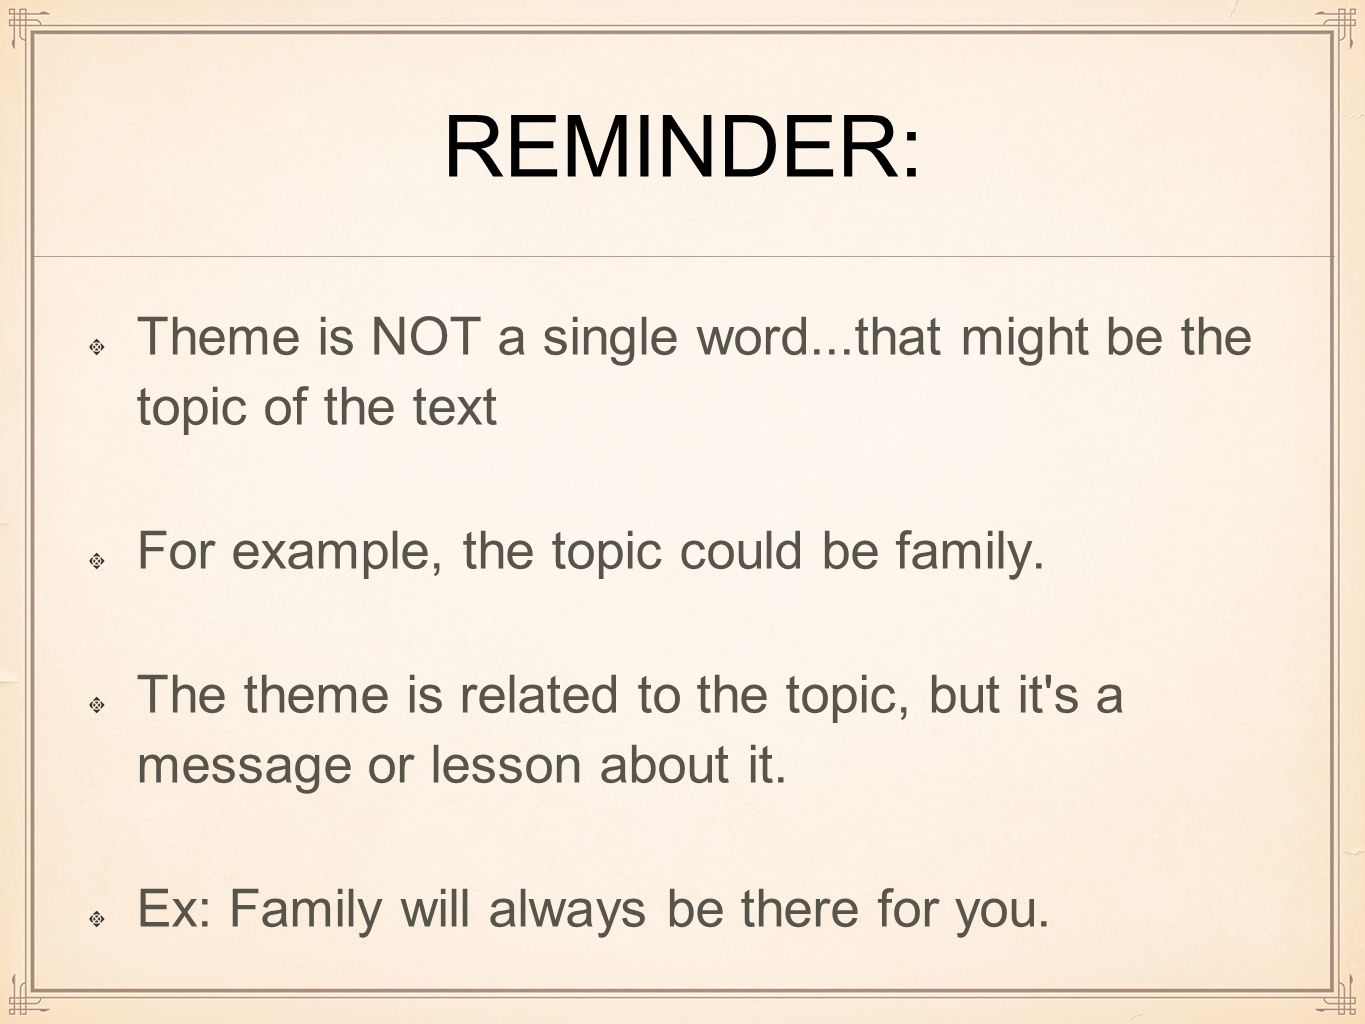 REMINDER: Theme is NOT a single word...that might be the topic of the text For example, the topic could be family.